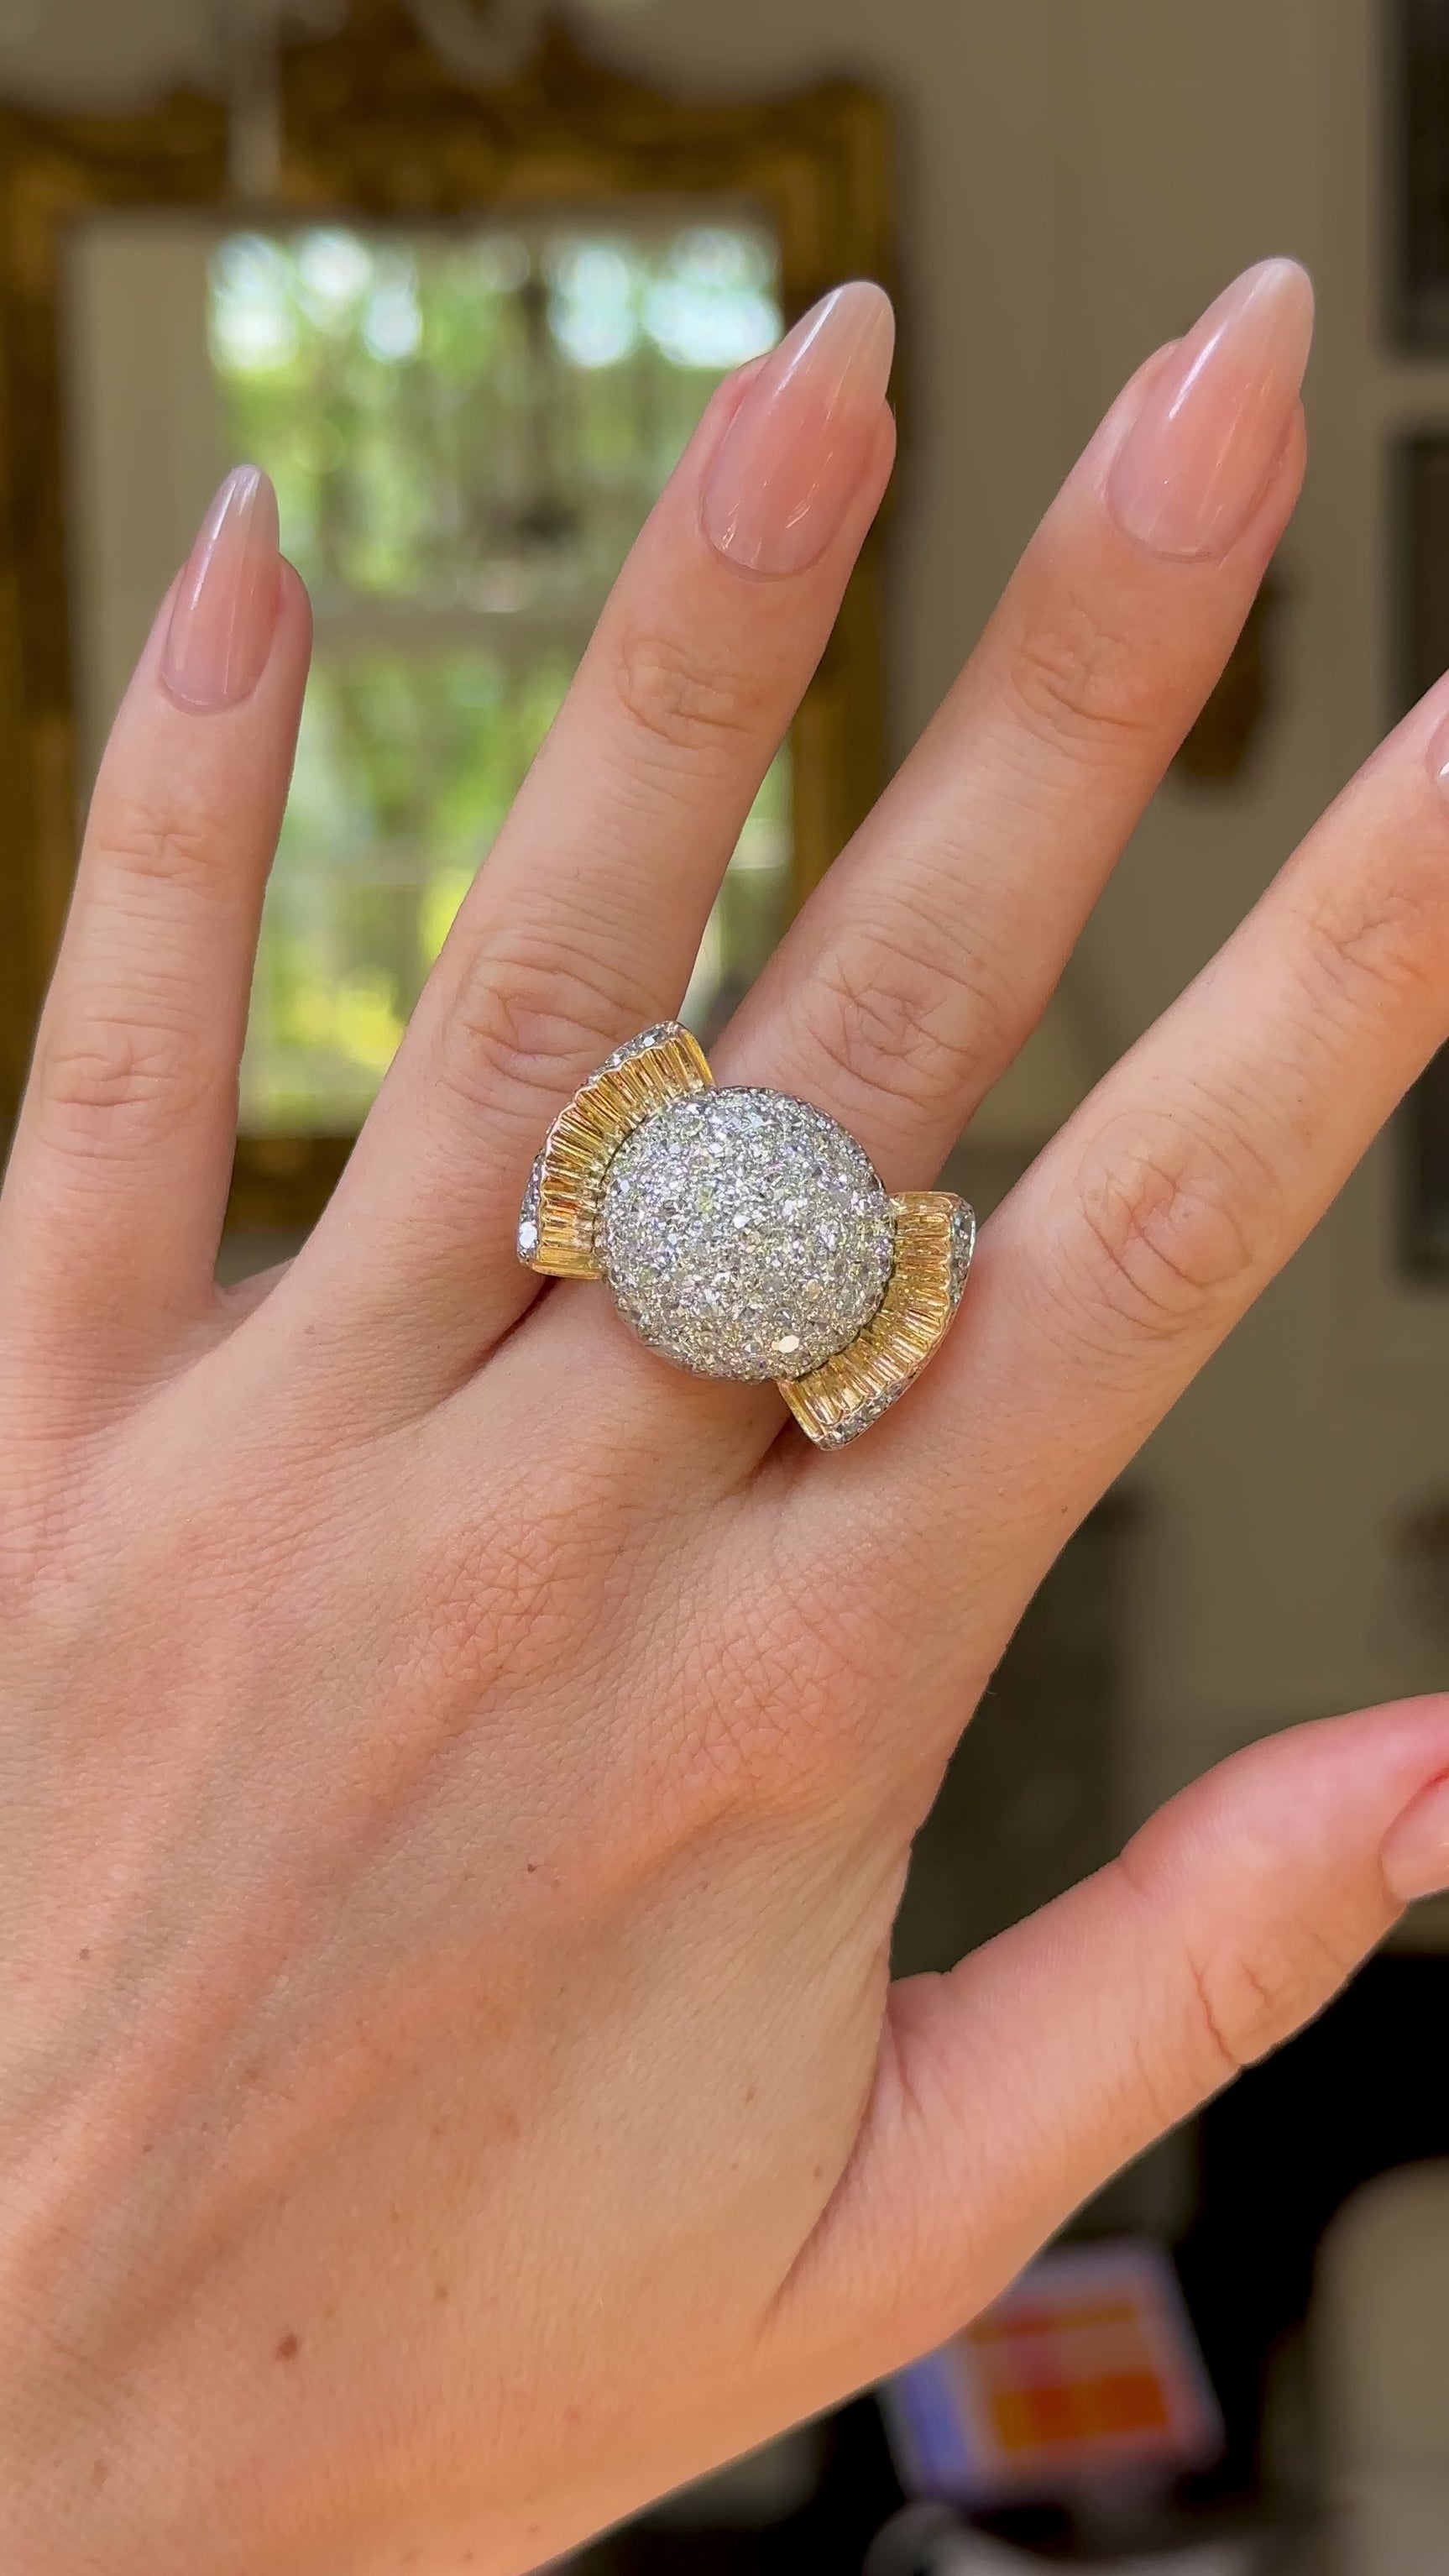 Cartier diamond bombe ring worn on hand and moved around to give perspective.